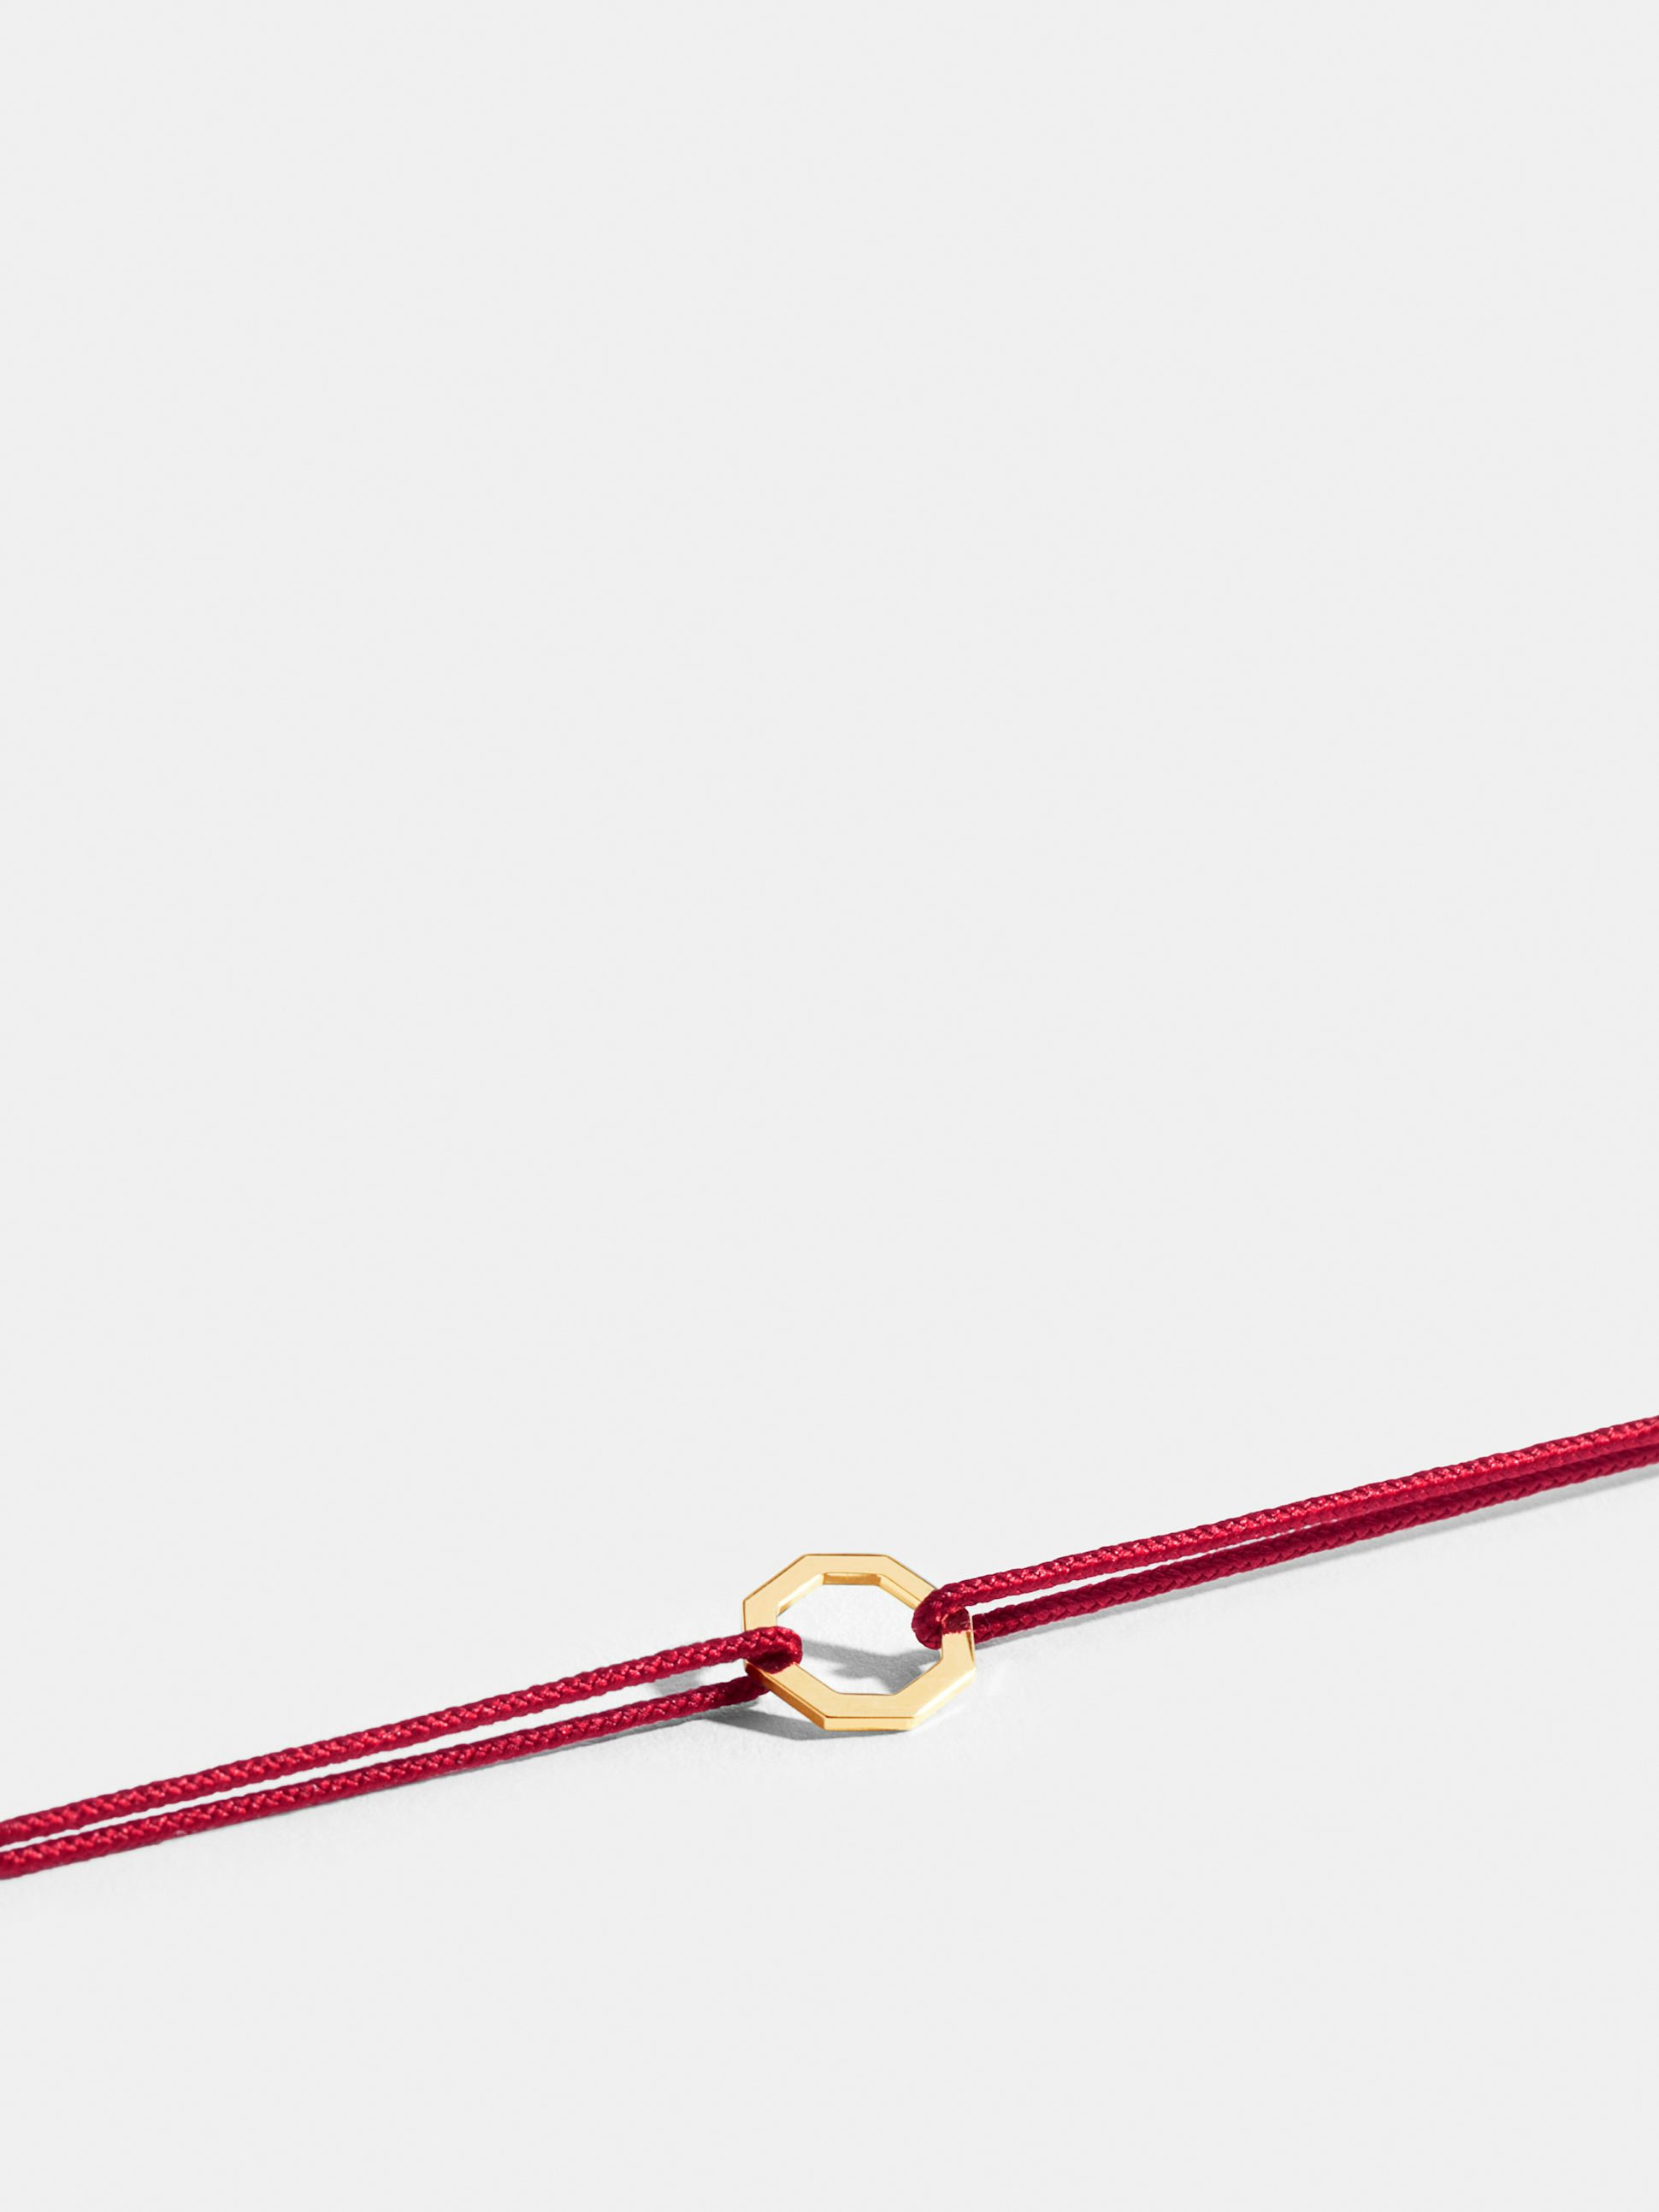 Octogone motif in 18k Fairmined ethical yellow gold, on a carmine red cord. 